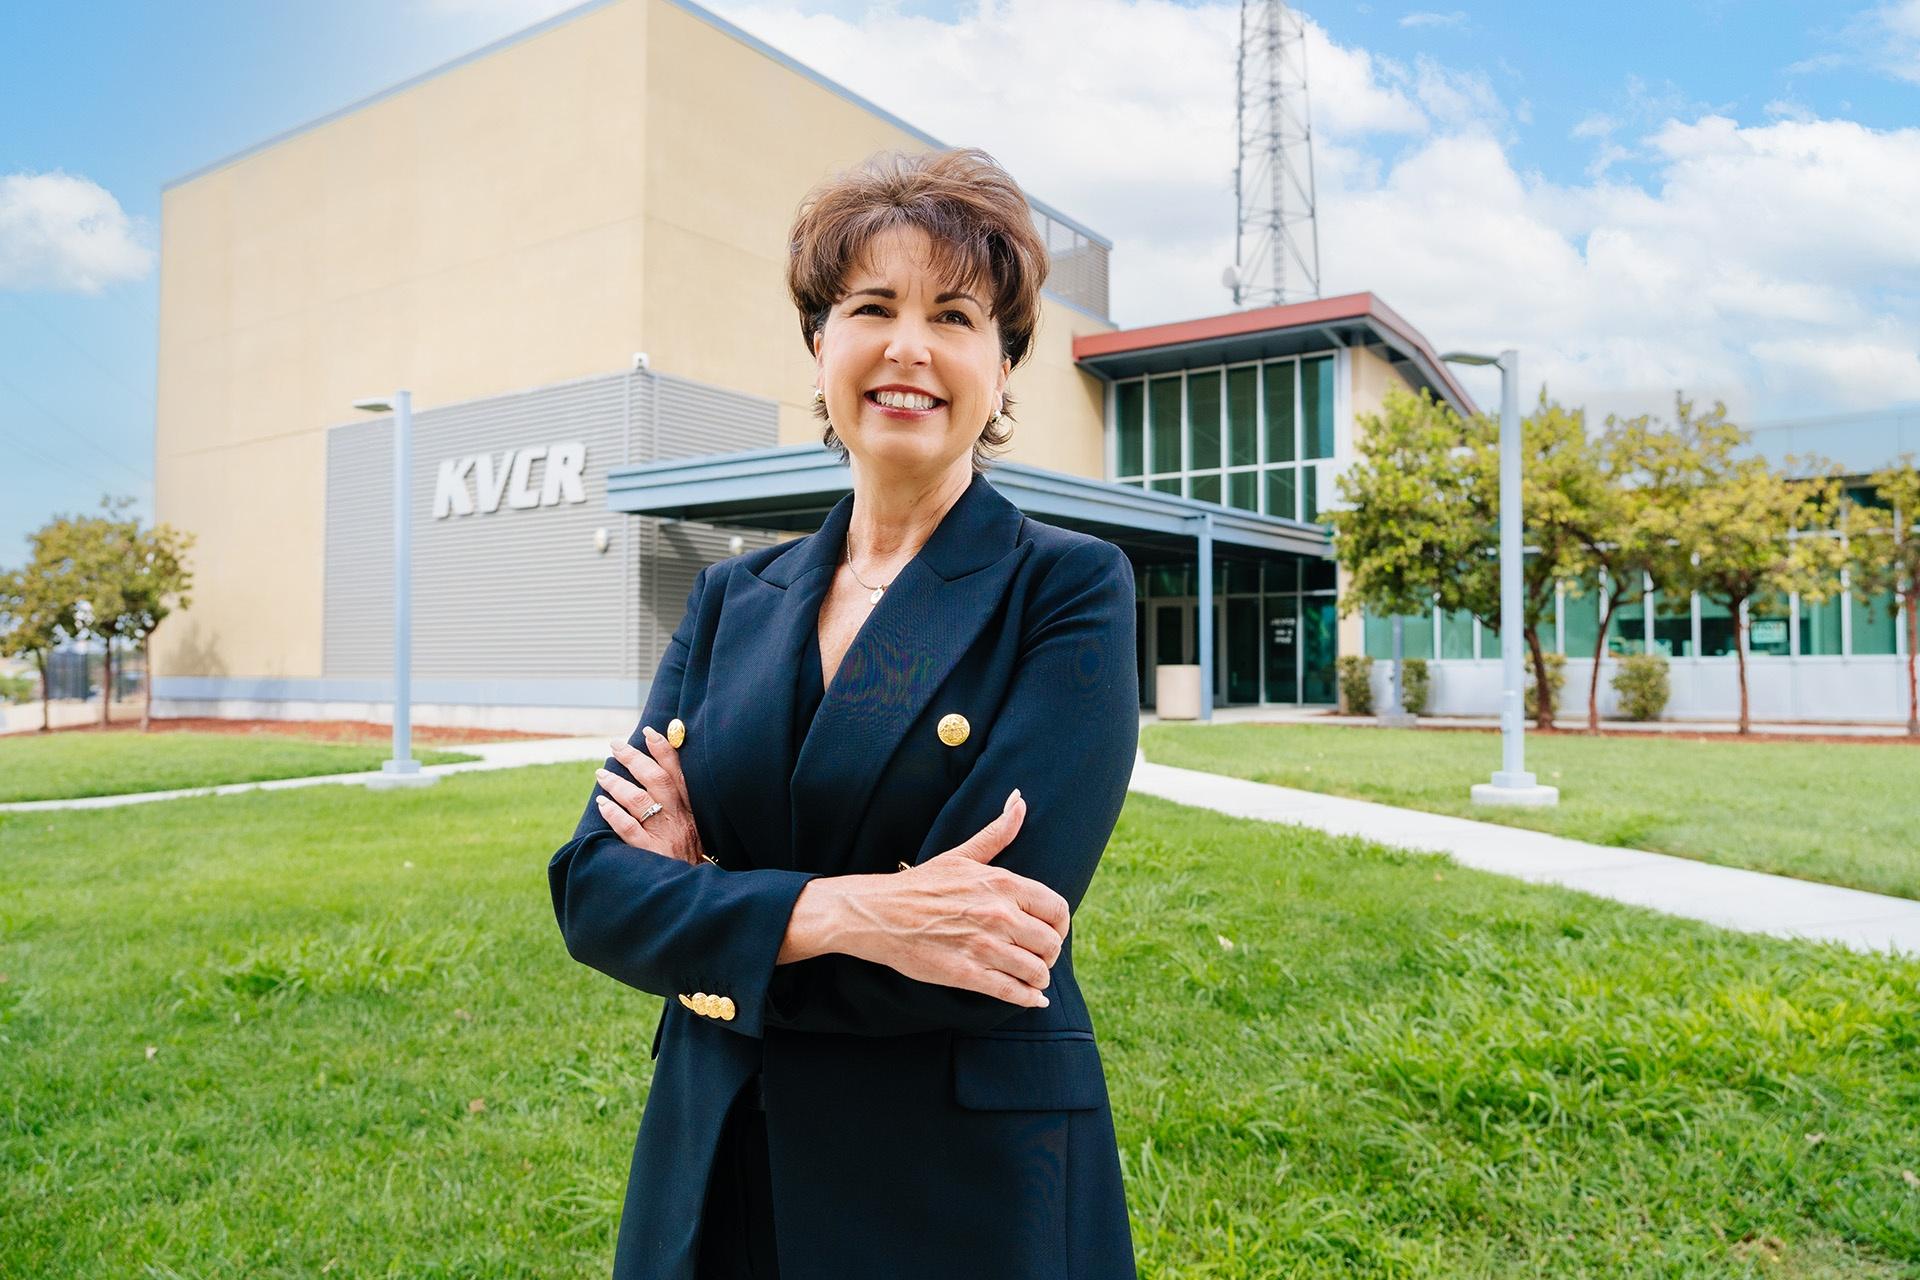 Connie Leyva in front of the KVCR studio located at the San Bernardino Valley College campus (Photo credit: Erick Zambrano/SBCCD)